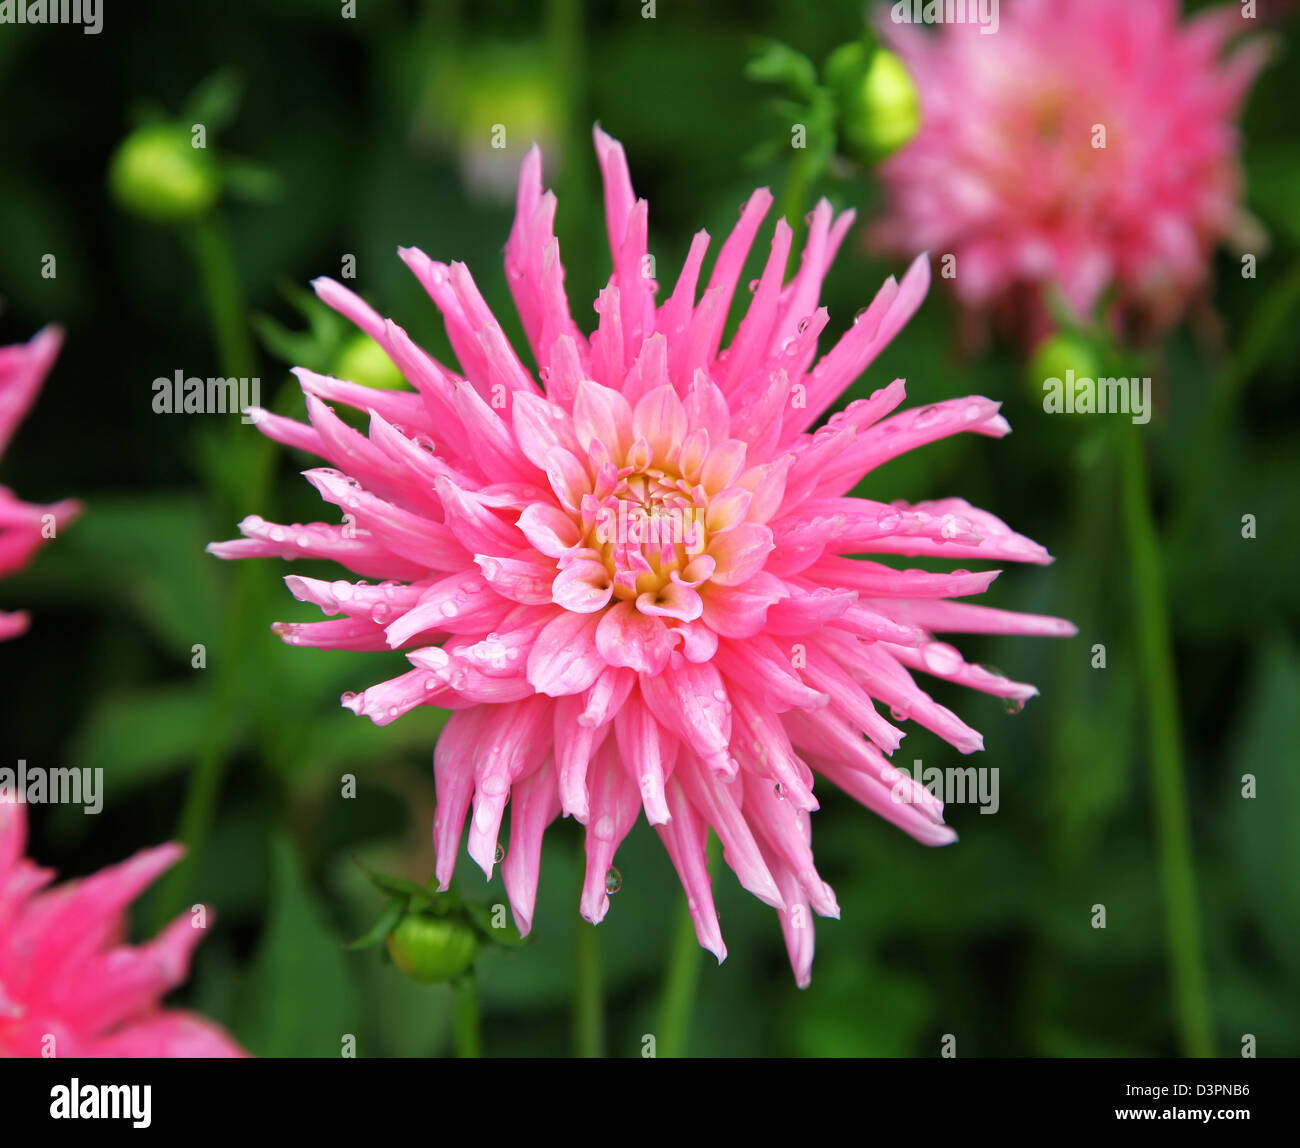 The pink spiky flower head of a Dahlia possibly ‘City of Leiden’ (Semi-Cactus Type) Stock Photo